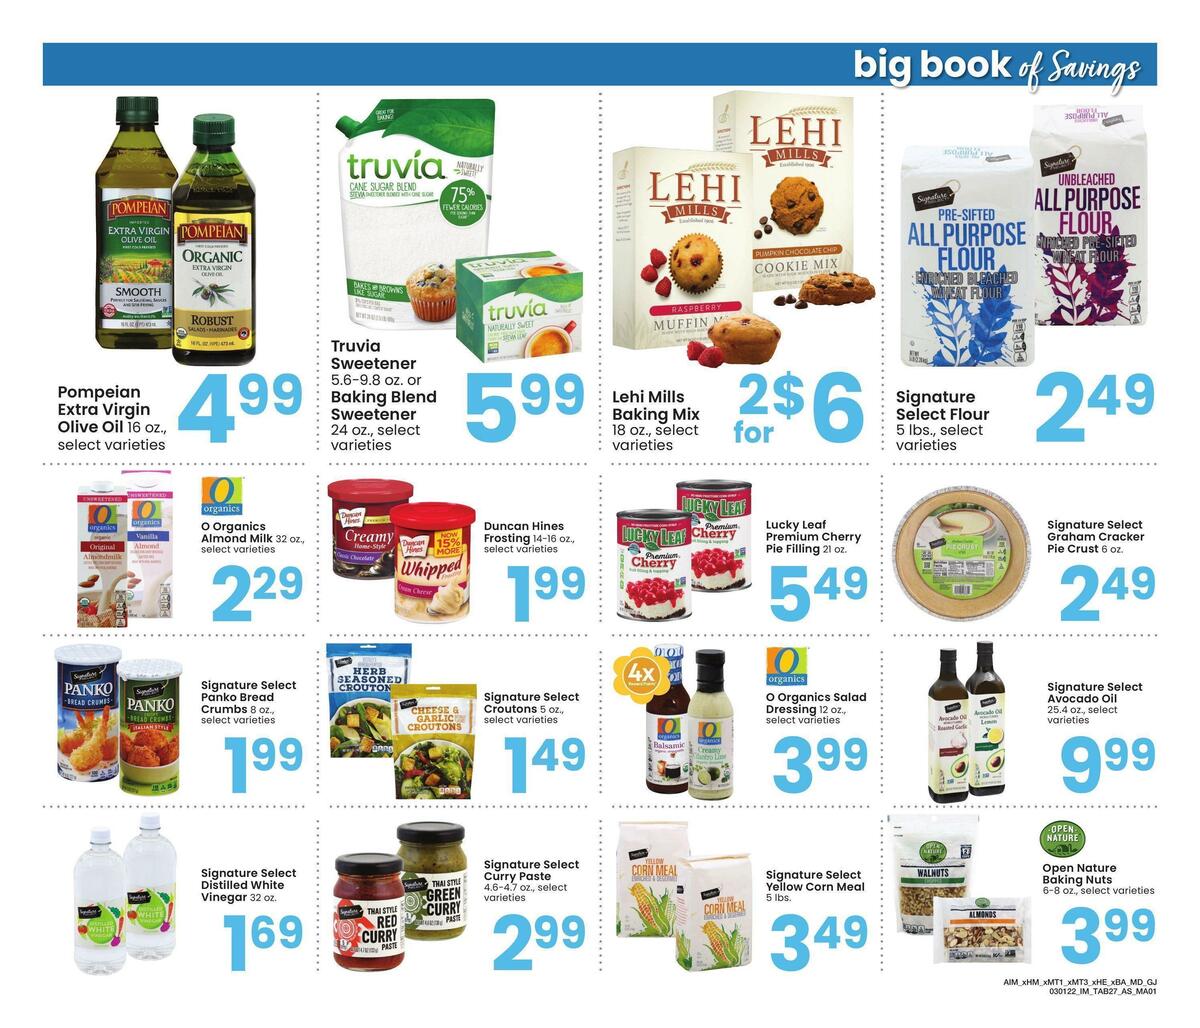 Albertsons Big Book of Savings Weekly Ad from March 1